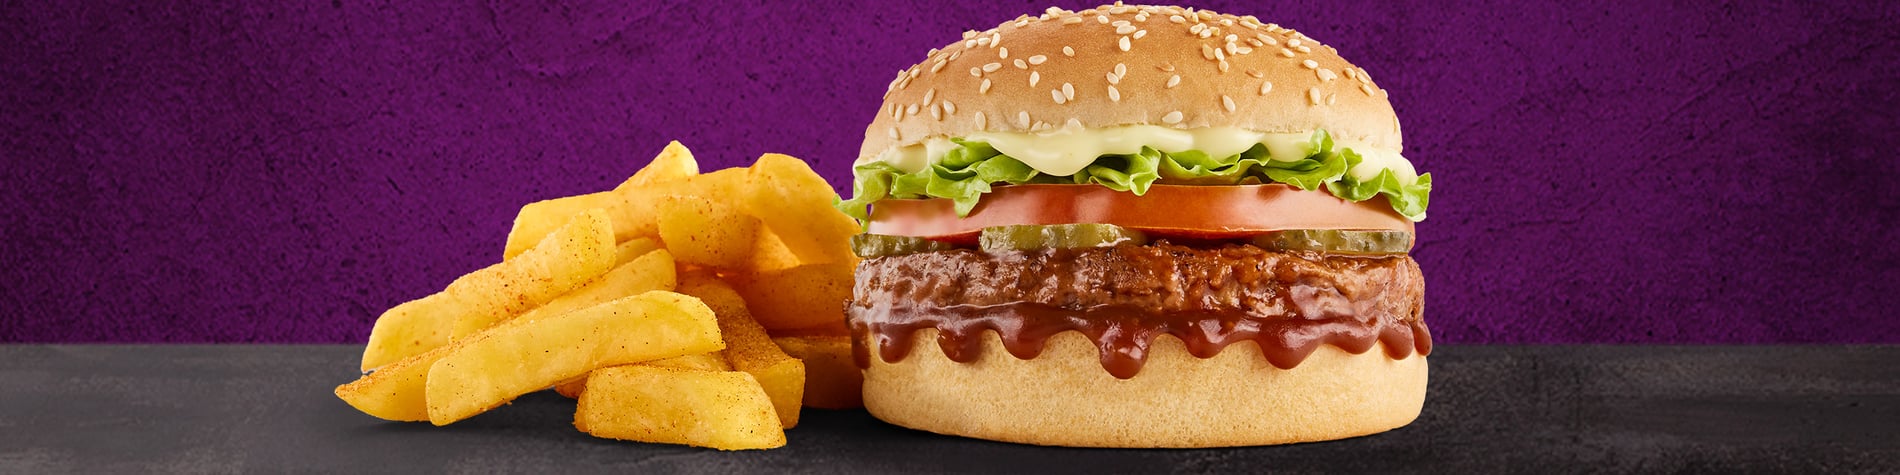 The NEW Mo’MjojoTM Burger Meal from Steers® Shell Estcourt South. 2 Flame-Grilled pure beef patties, pineapple, macon, tomato, lettuce, and small Famous Hand-Cut Chips, on a purple background.